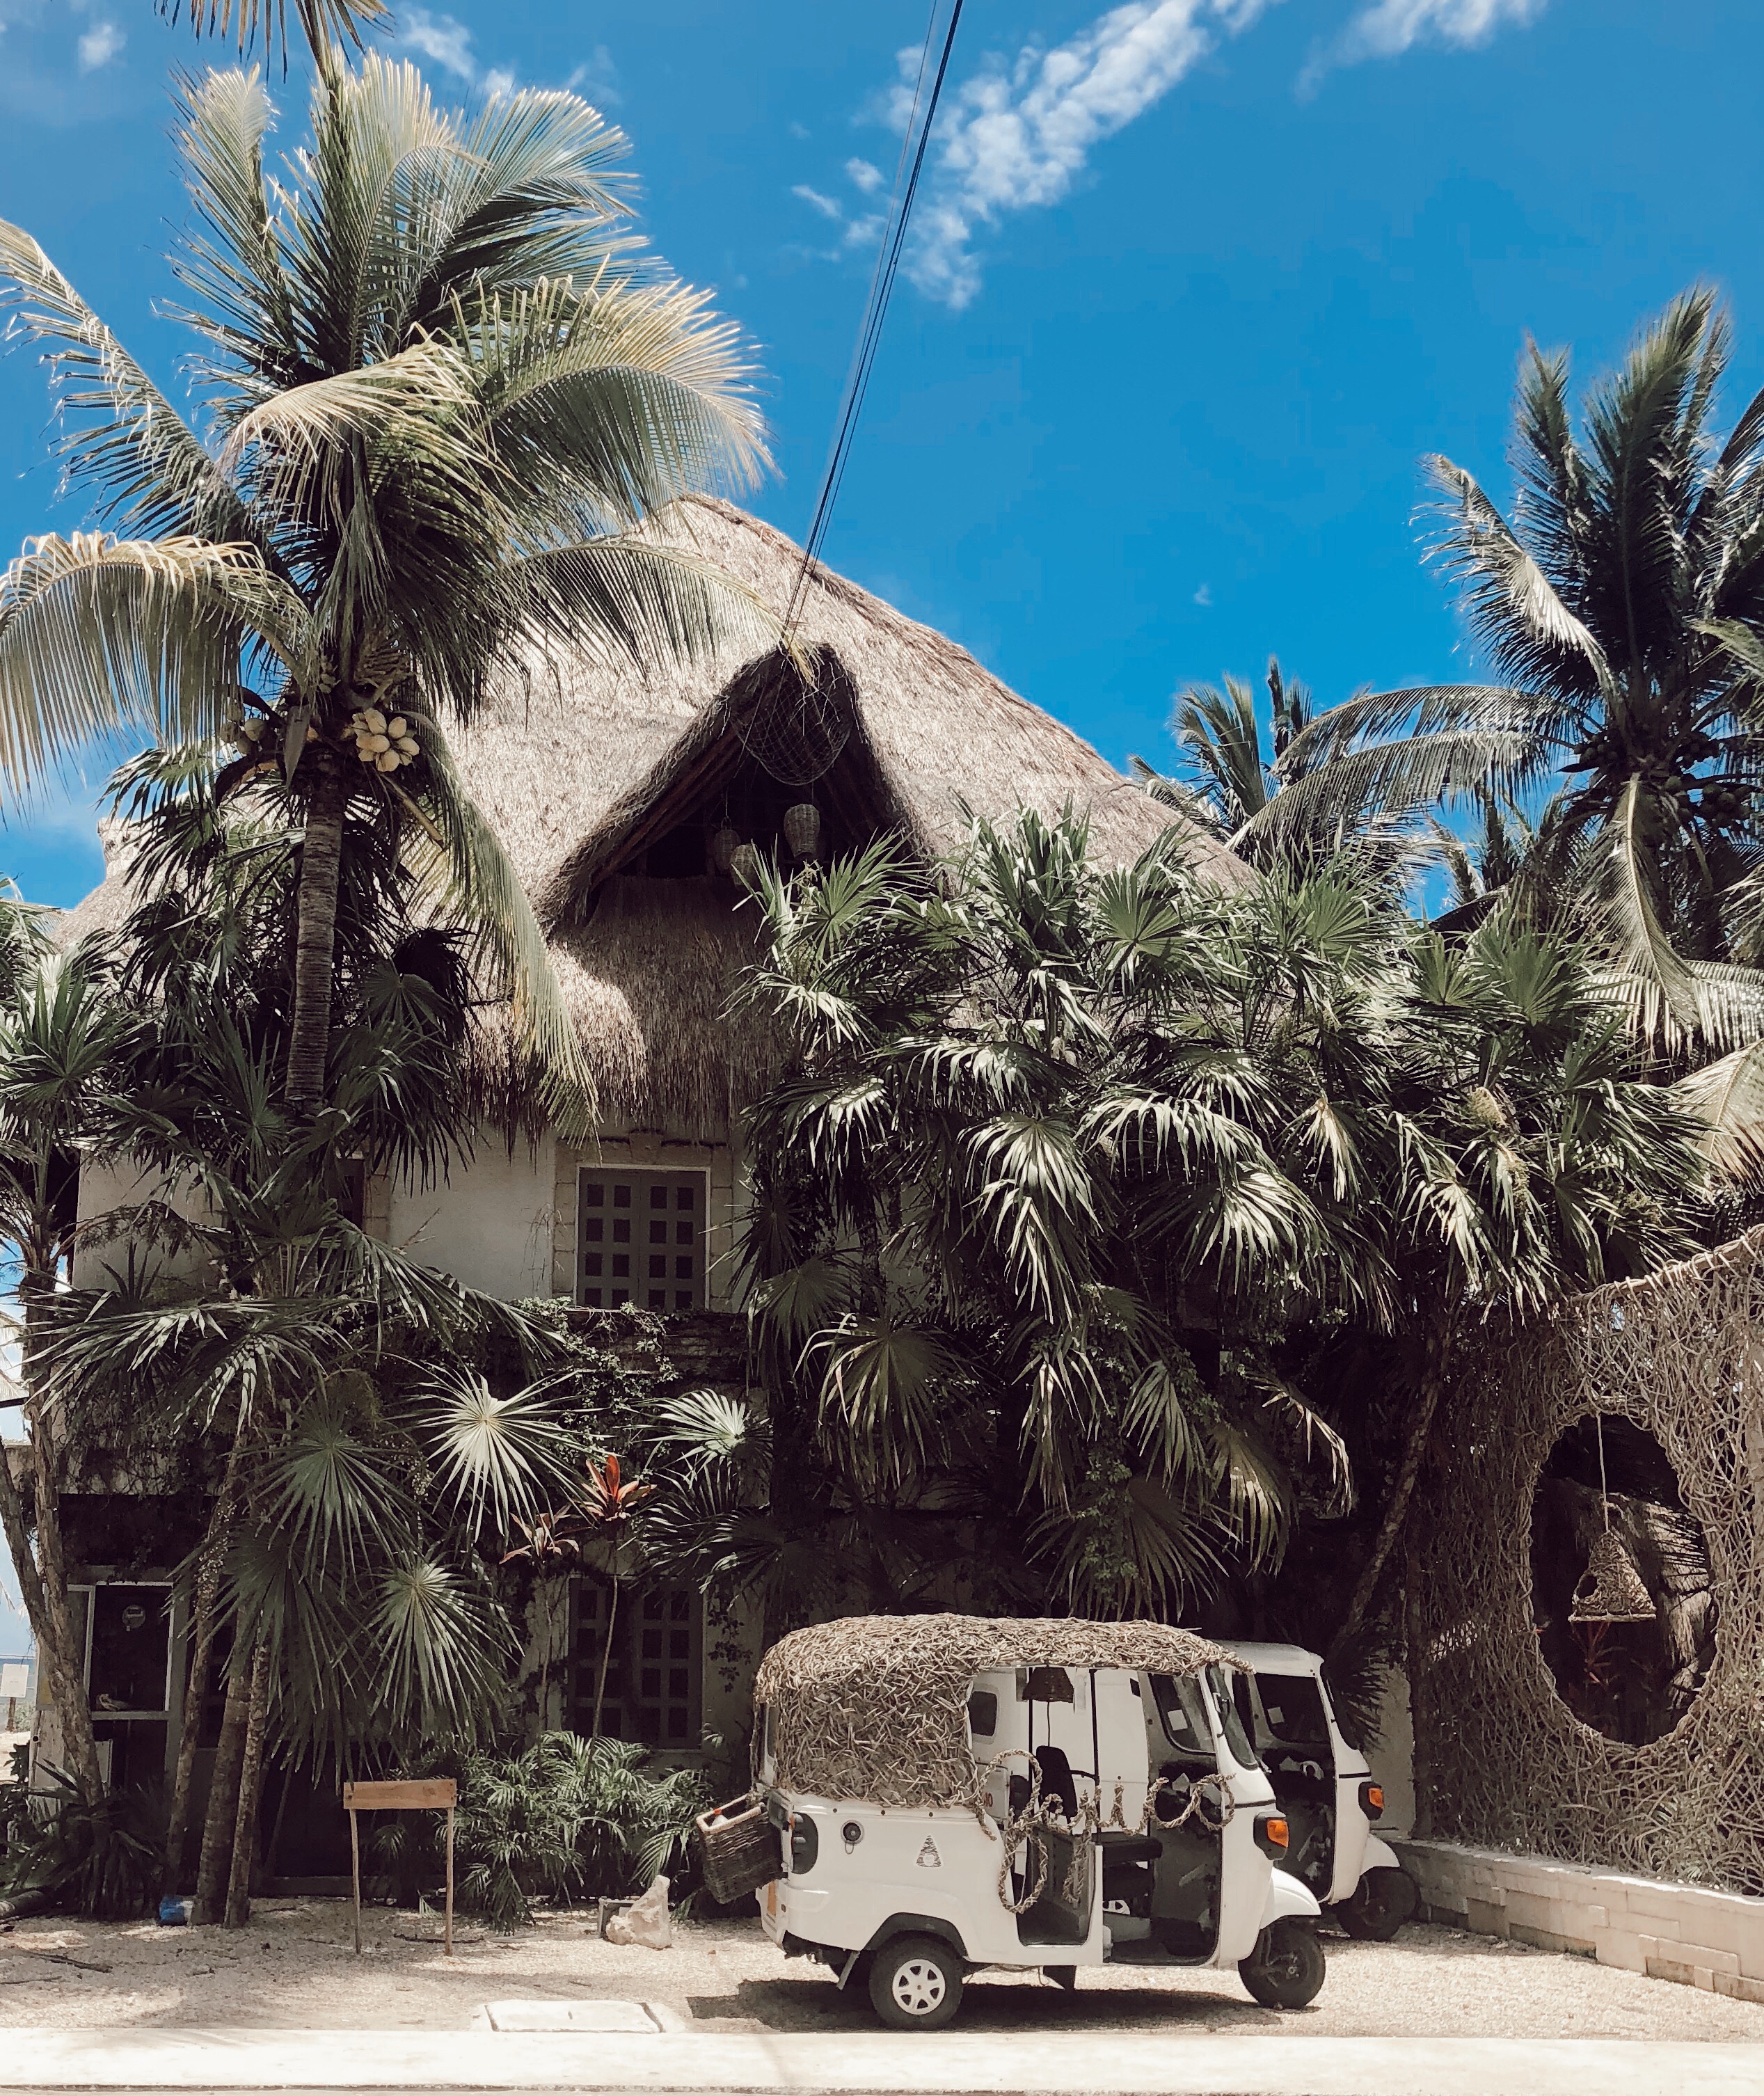 Ashley Zeal from Two Peas in a Prada shares her Tulum Travel Guide, including where to stay, eat, what to do, what to pack, and travel details.